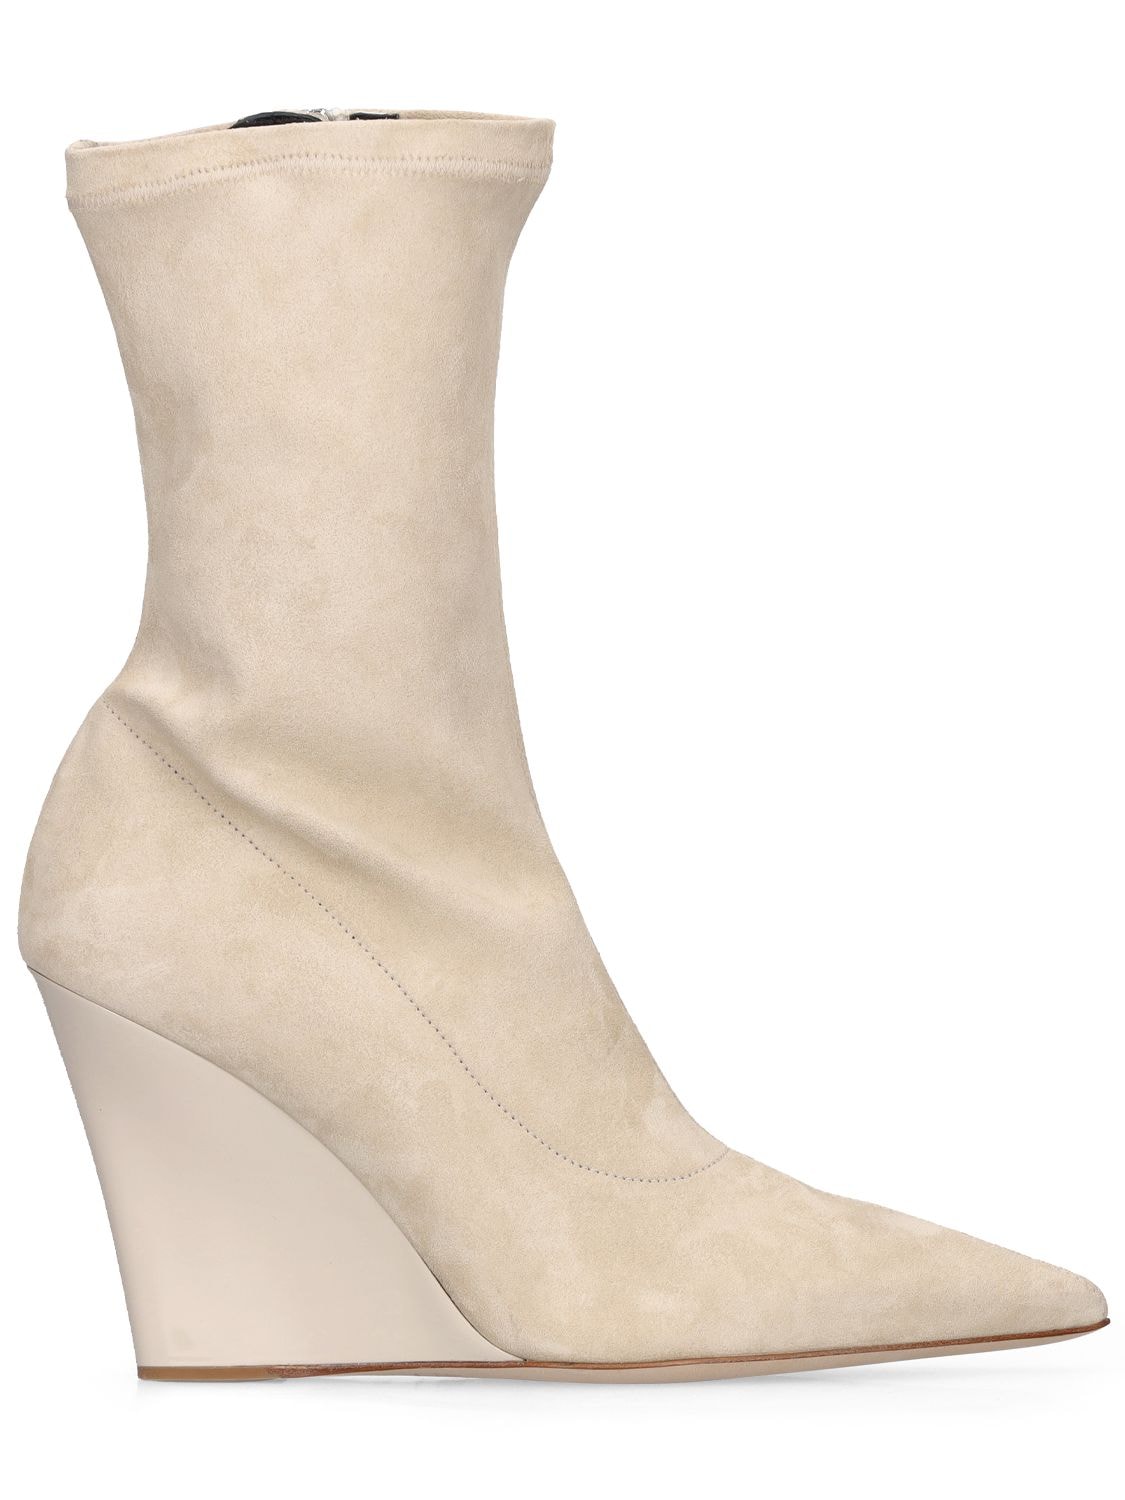 Paris Texas 95mm Wanda Ankle Boots In Ivory